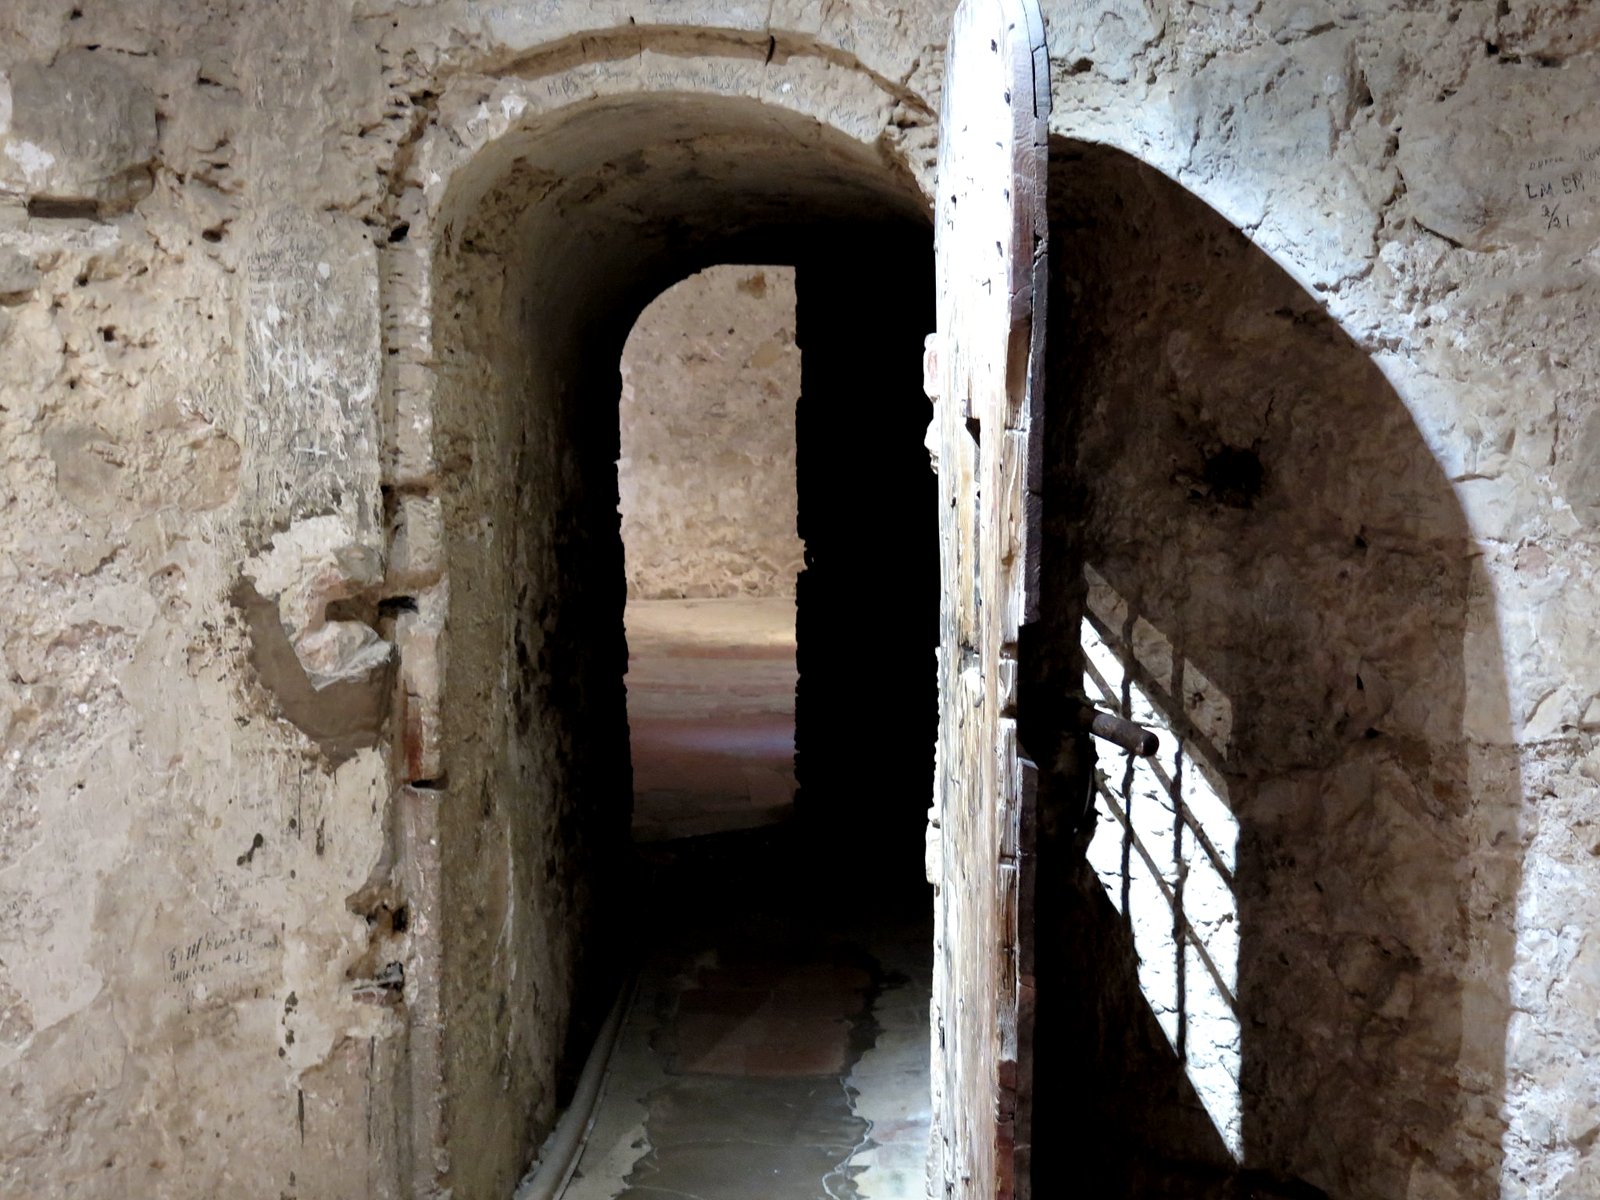 How to visit the prison cell of The Count of Monte Cristo in Marseille